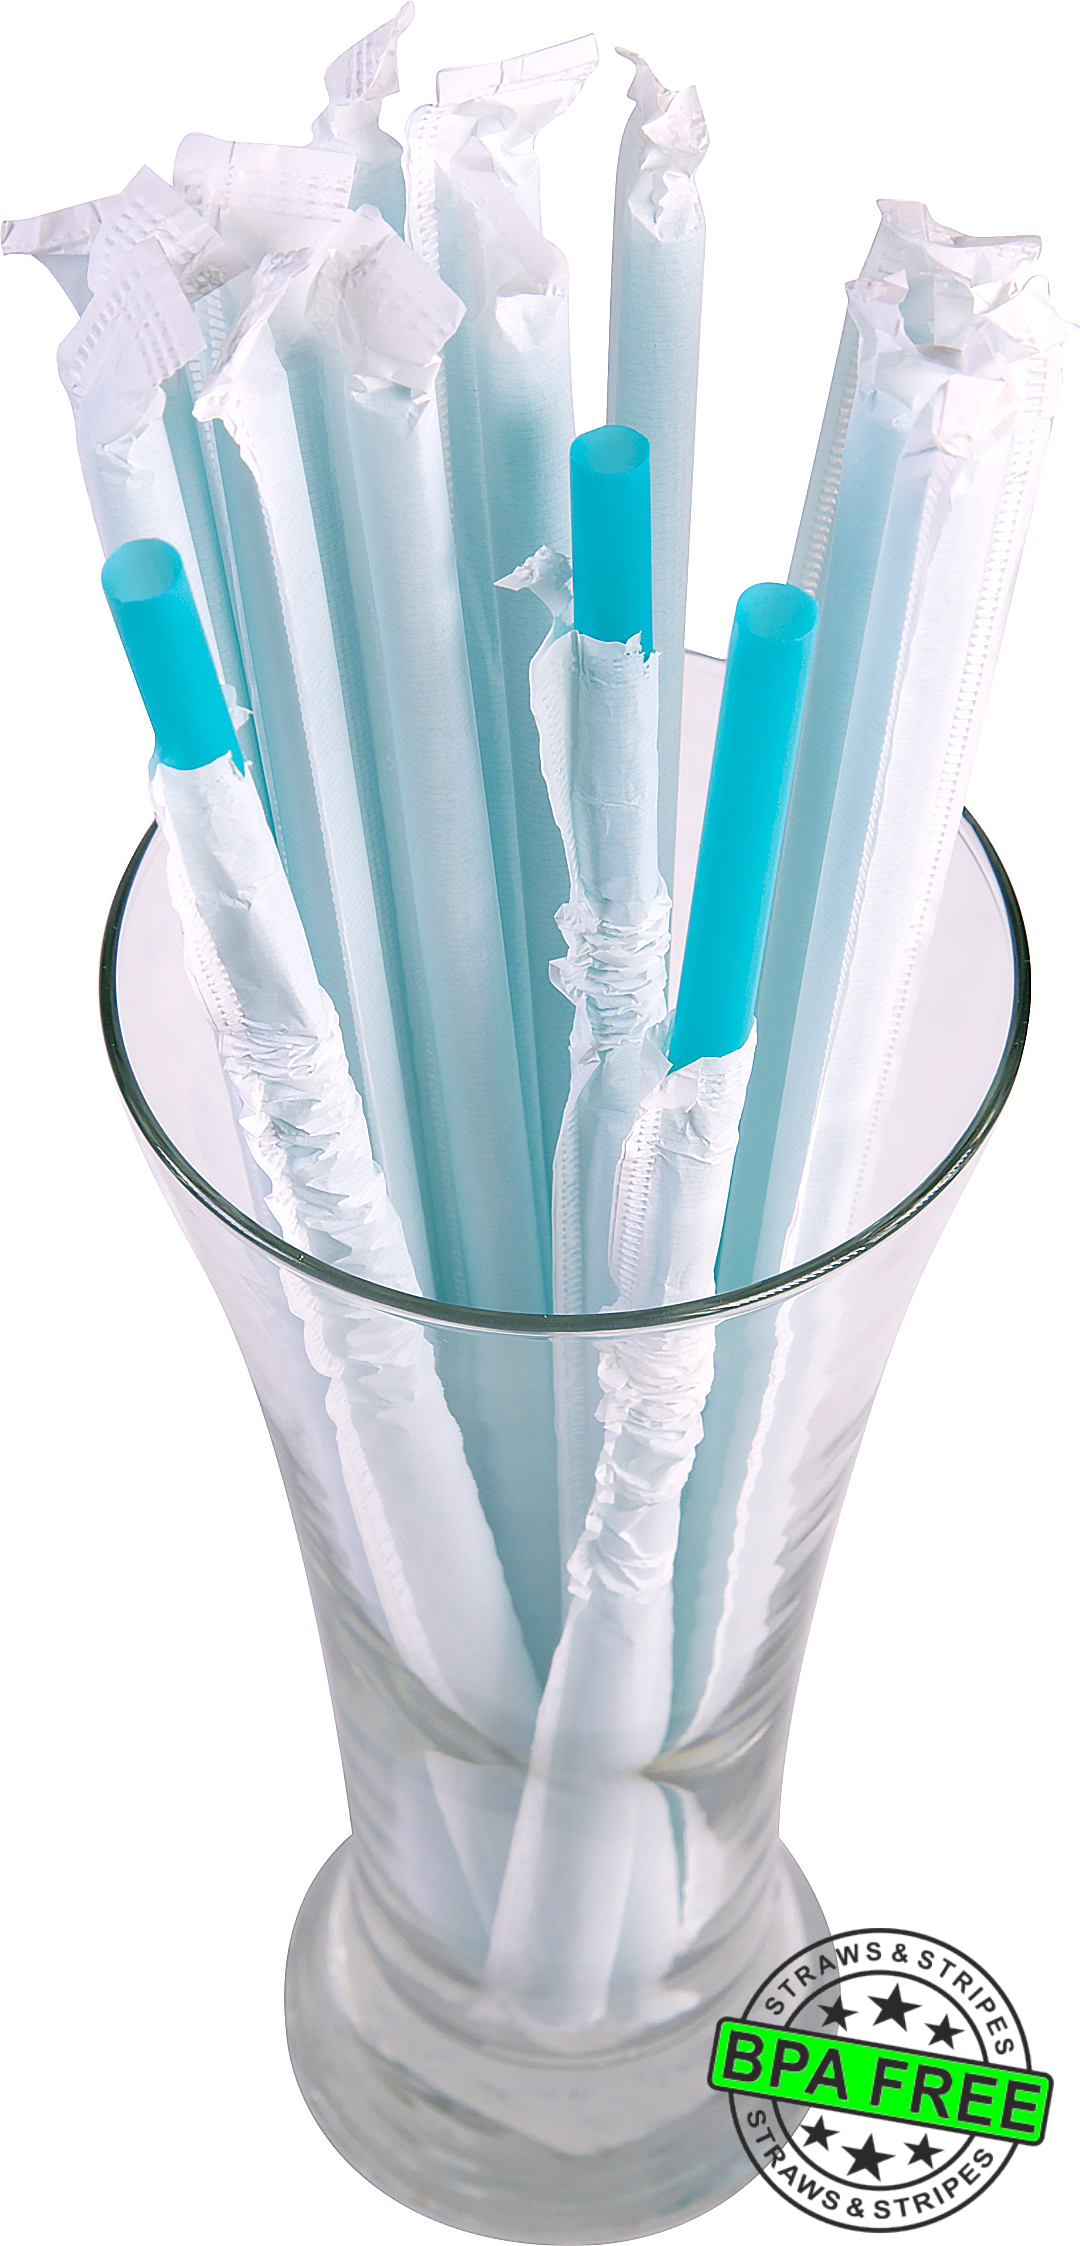 1 CASE - 2,500 (10x250) PAPER WRAPPED SMOOTHIE drinking straws 10 x 0.28 inch - color: aqua